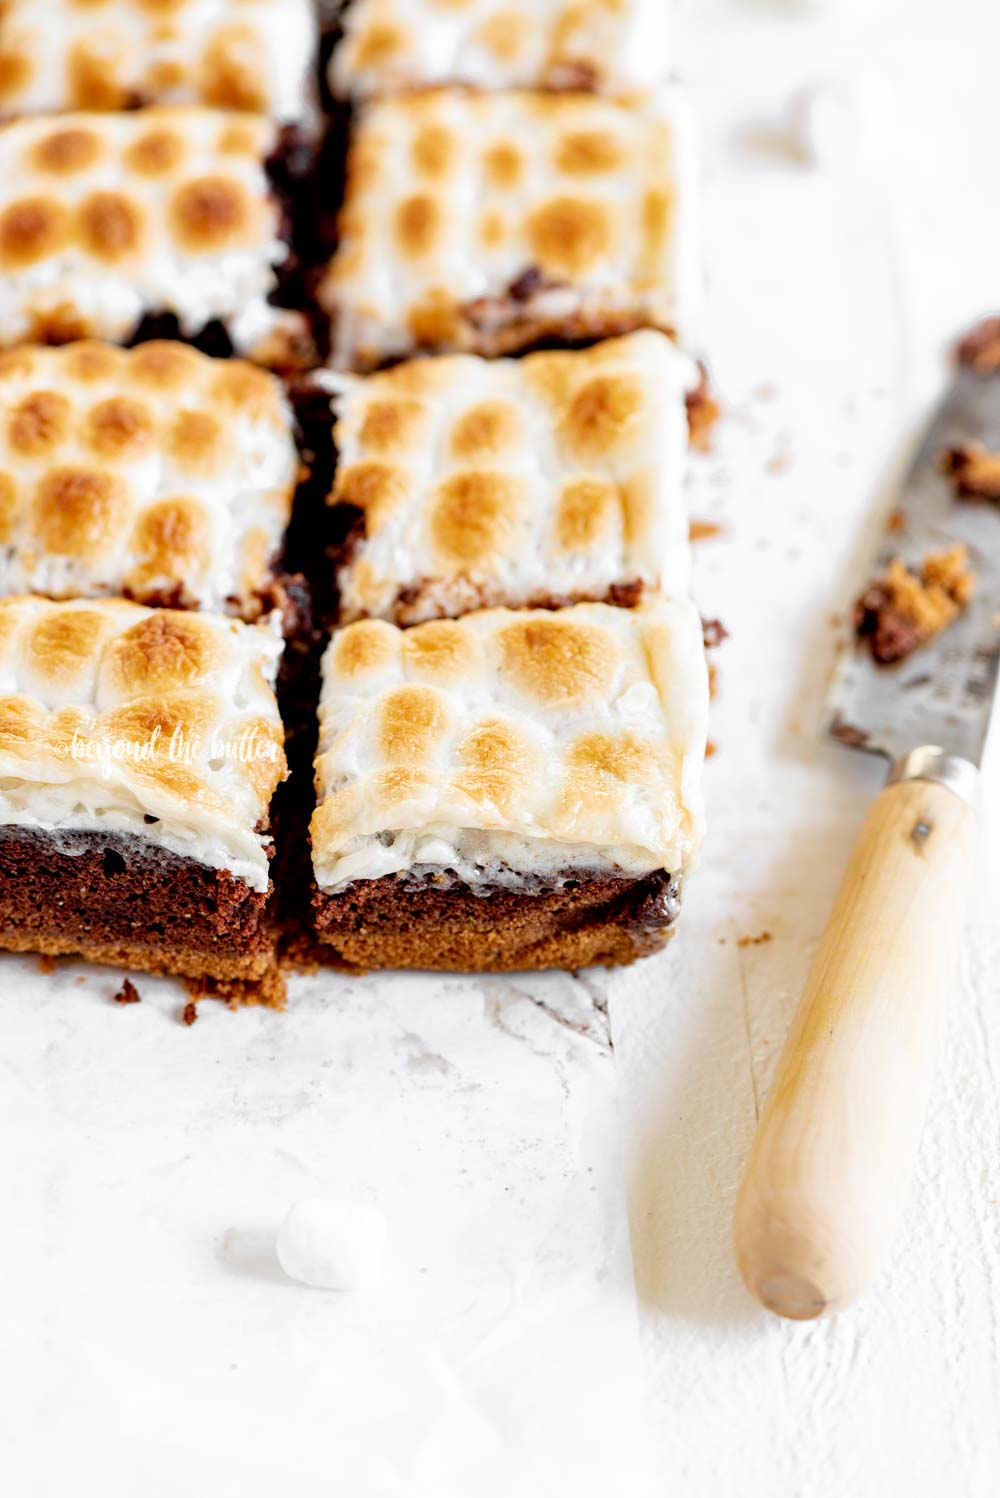 Layered S'mores Brownies | All Images © Beyond the Butter, LLC